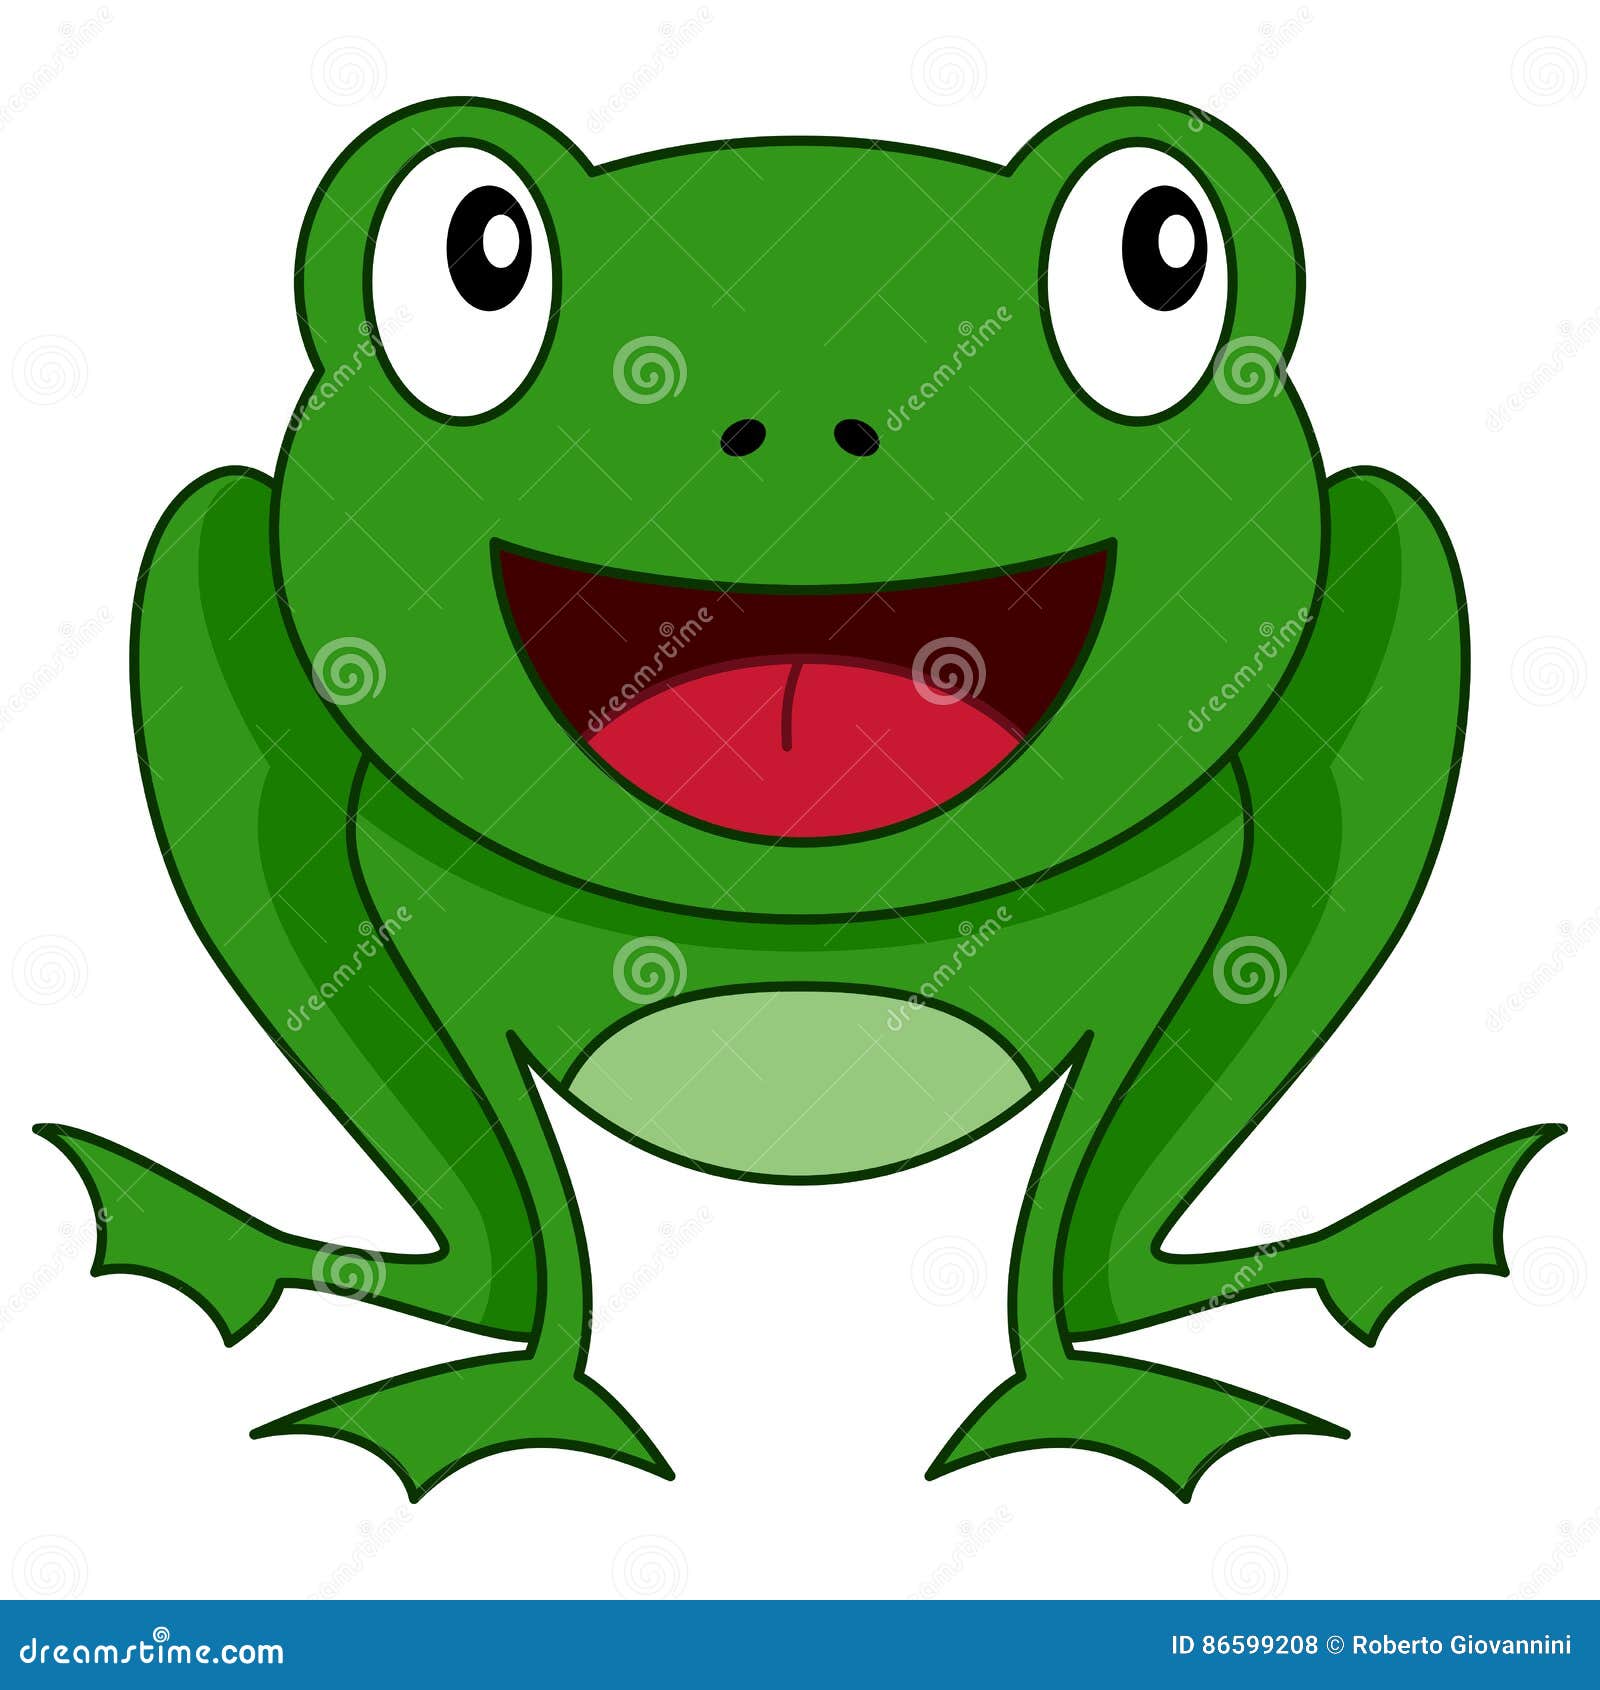 Images Of Cute Cartoon Frog Face